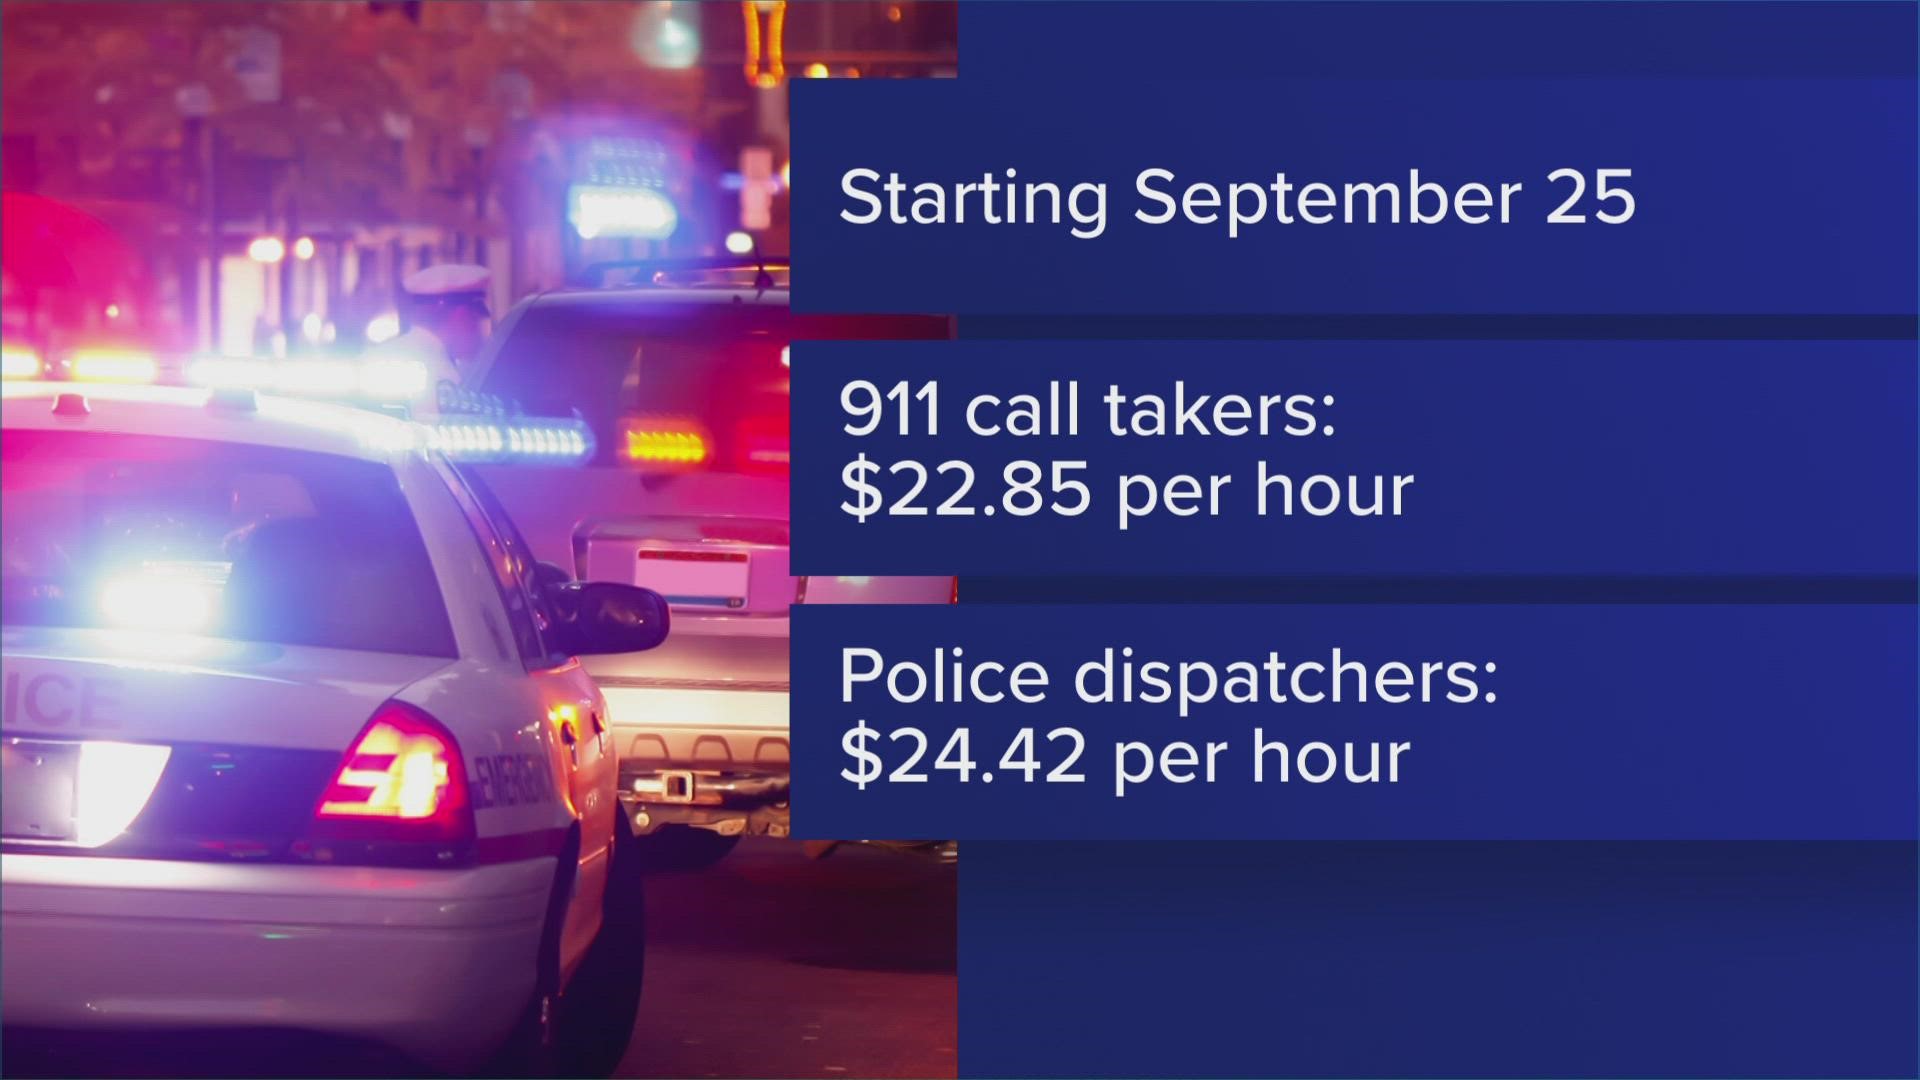 Starting on Sept. 25, 911 call takers will make at least $22.85 an hour while police dispatchers will make at least $24.42.